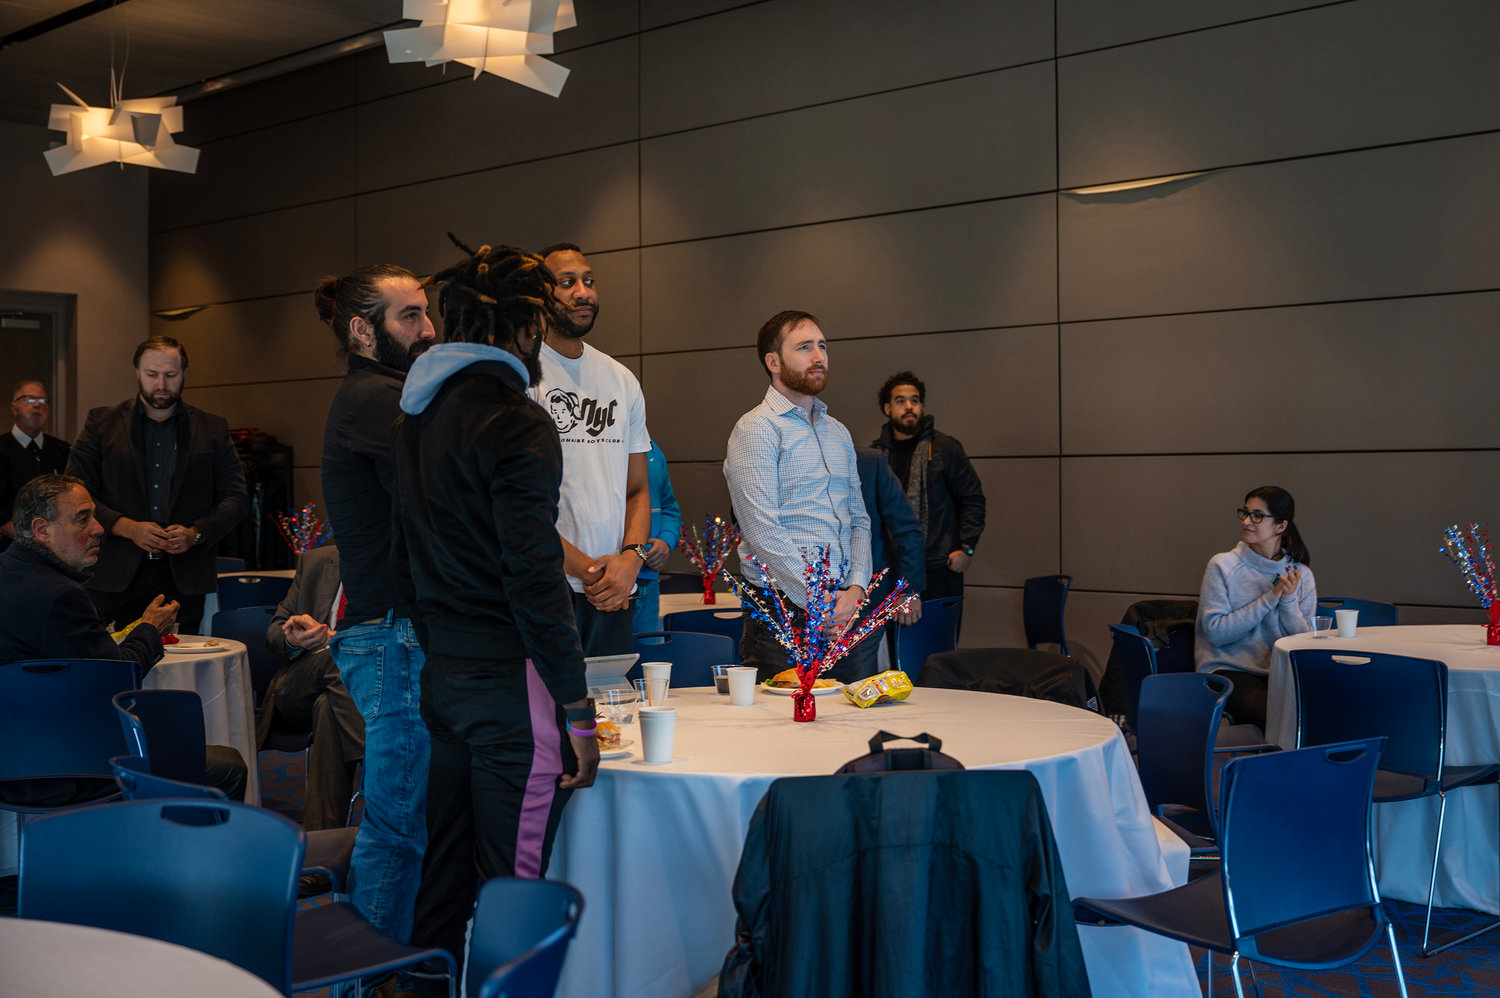 Student veterans stand to be recognized at a luncheon in Manhattan College’s Raymond W. Student Commons building on Nov. 14. One of the students, Chris Norberto, is president of the college’s Student Veterans Organization.